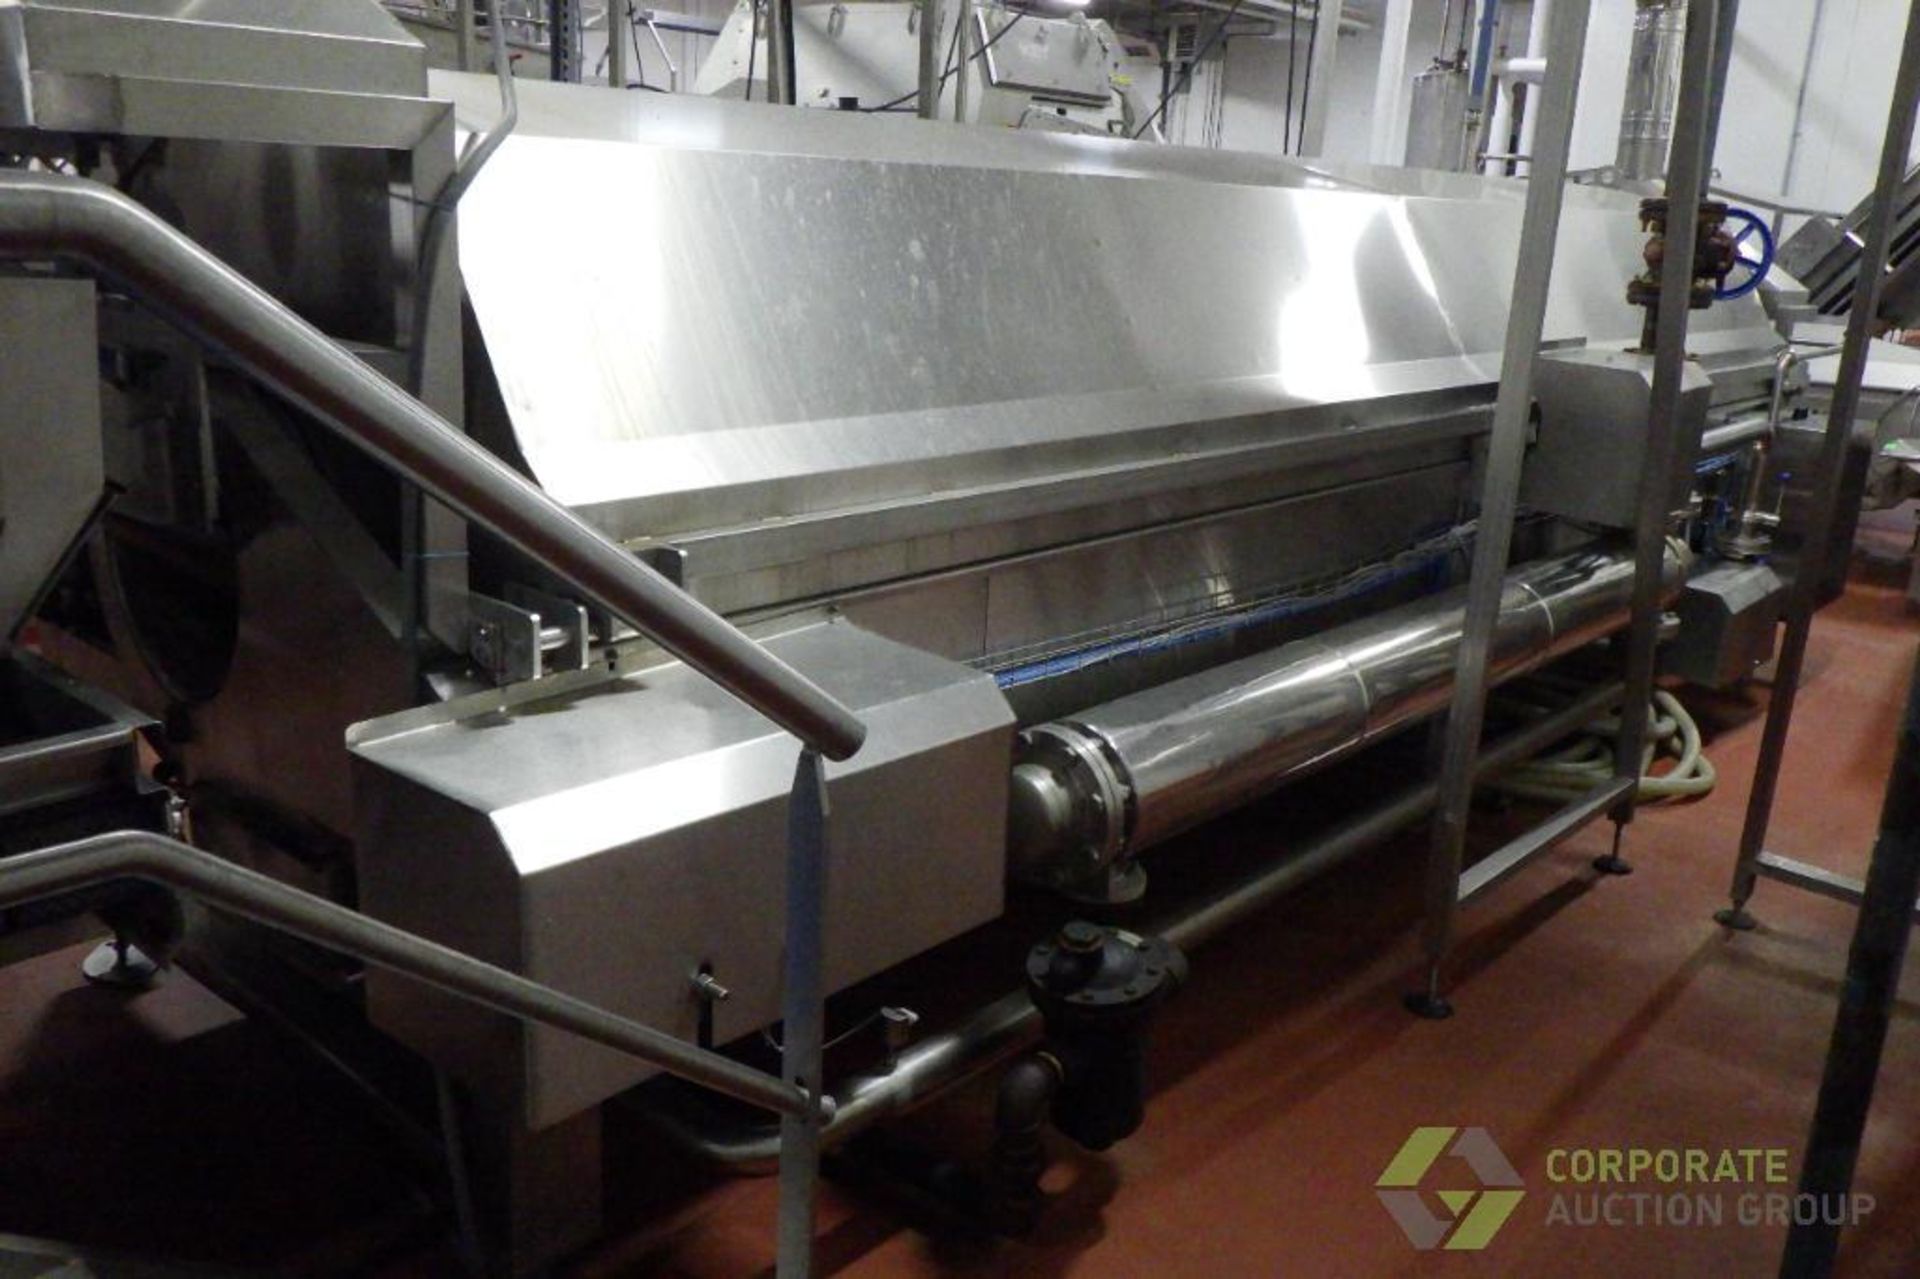 2022 Hellenic Food Machinery Drum Blancher w/ Exhaust Hood, Control Panel, 575V - Image 8 of 41